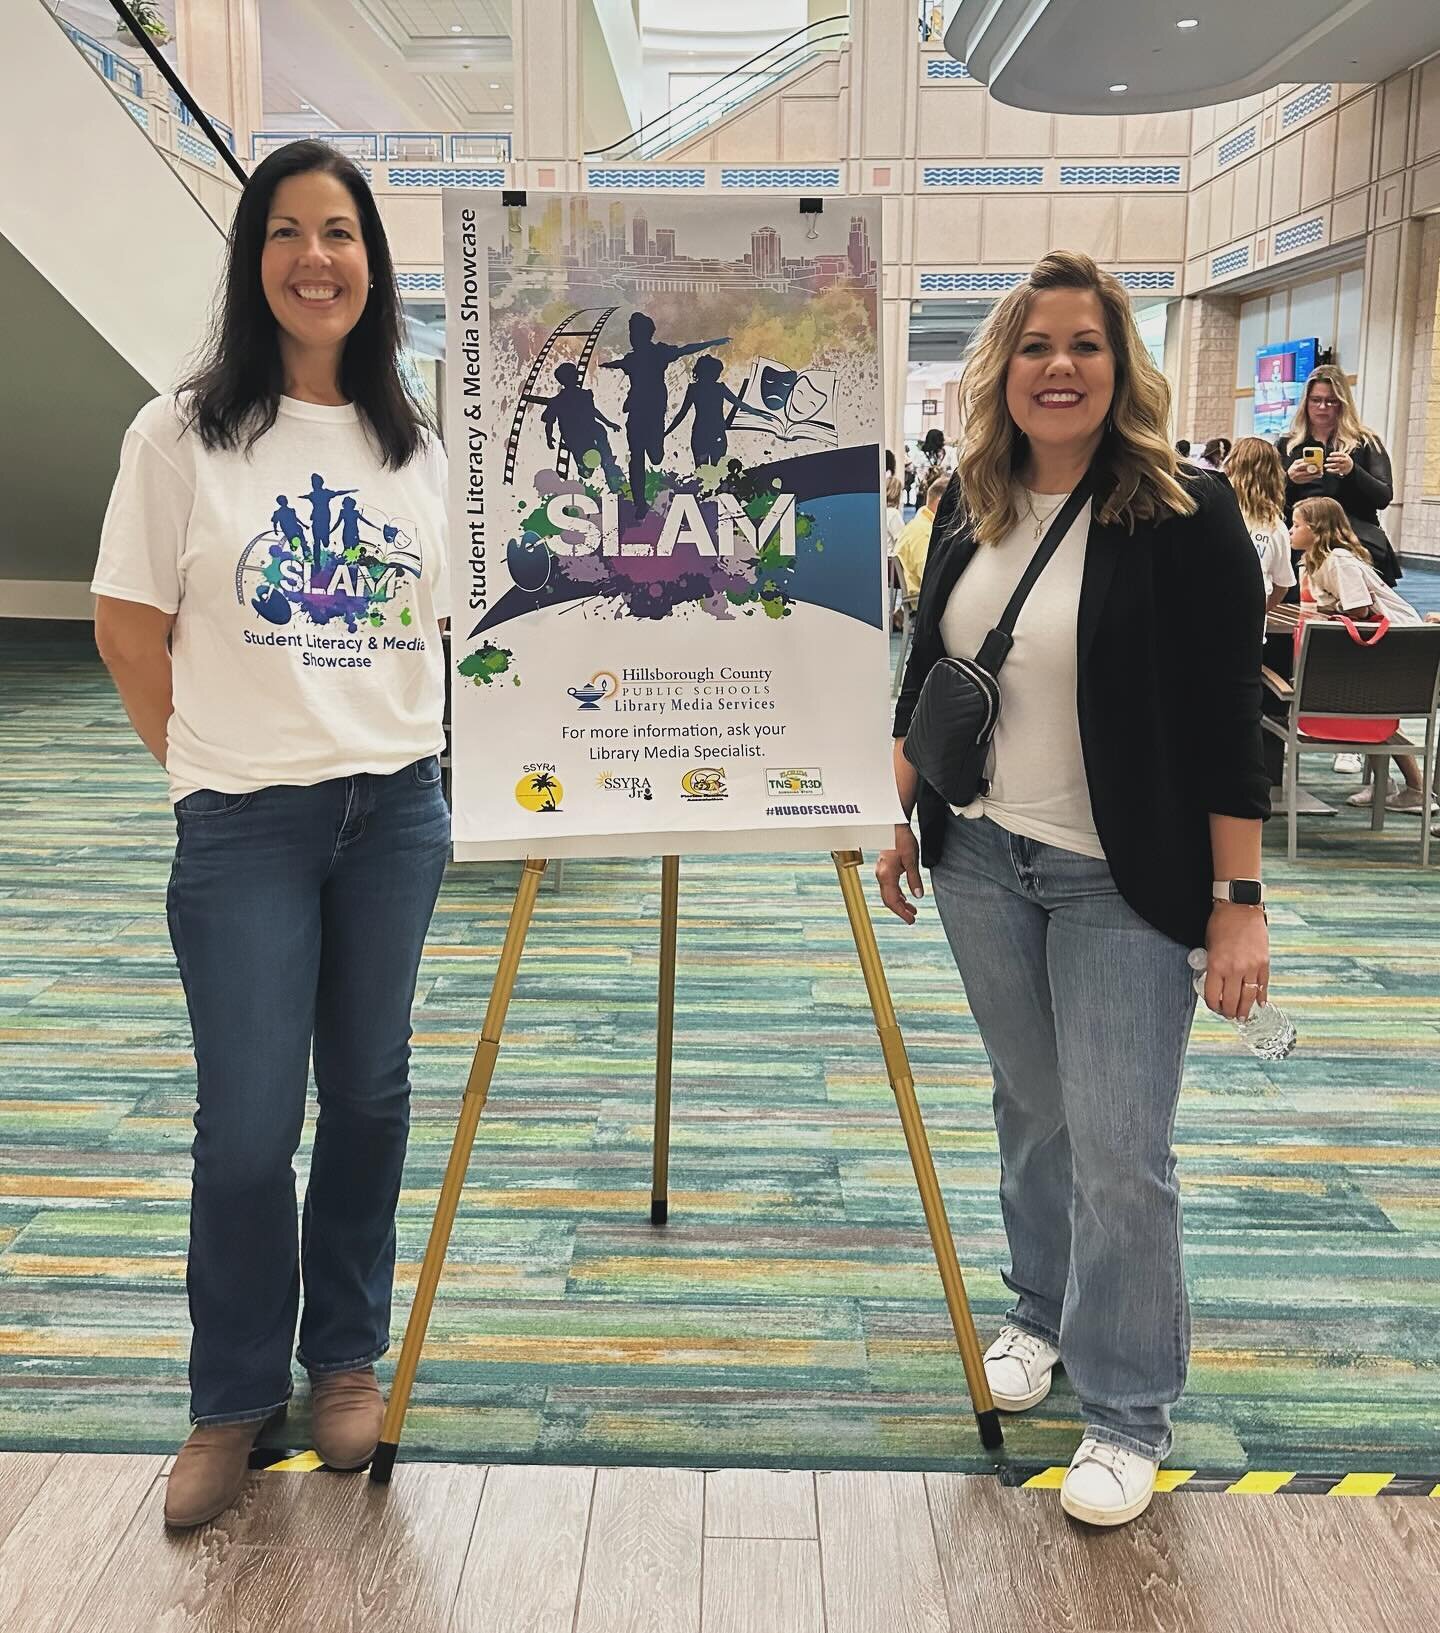 Had a wonderful time at the SLAM showcase yesterday with Hillsborough County! Such a privilege to see so many students and talk about books with authors I&rsquo;ve admired forever. Until next time! 📚 🤓 

#books #hillsboroughcountyschools #authorsof